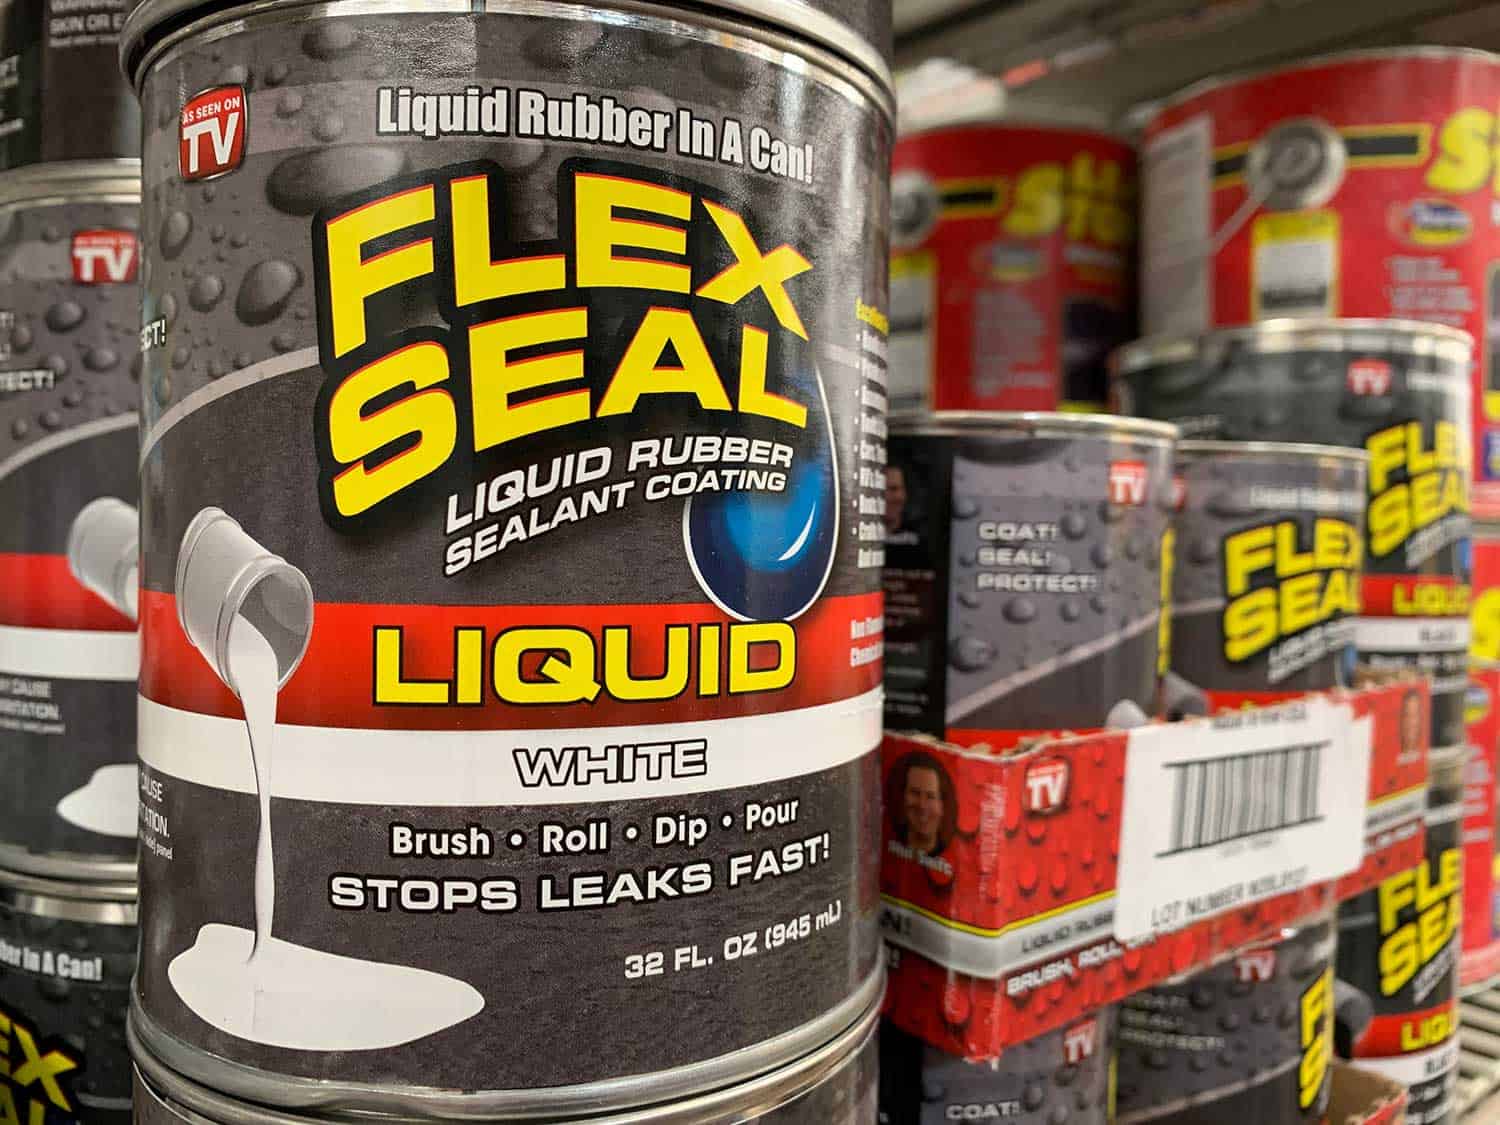 Cans of Flex Seal on a store shelf